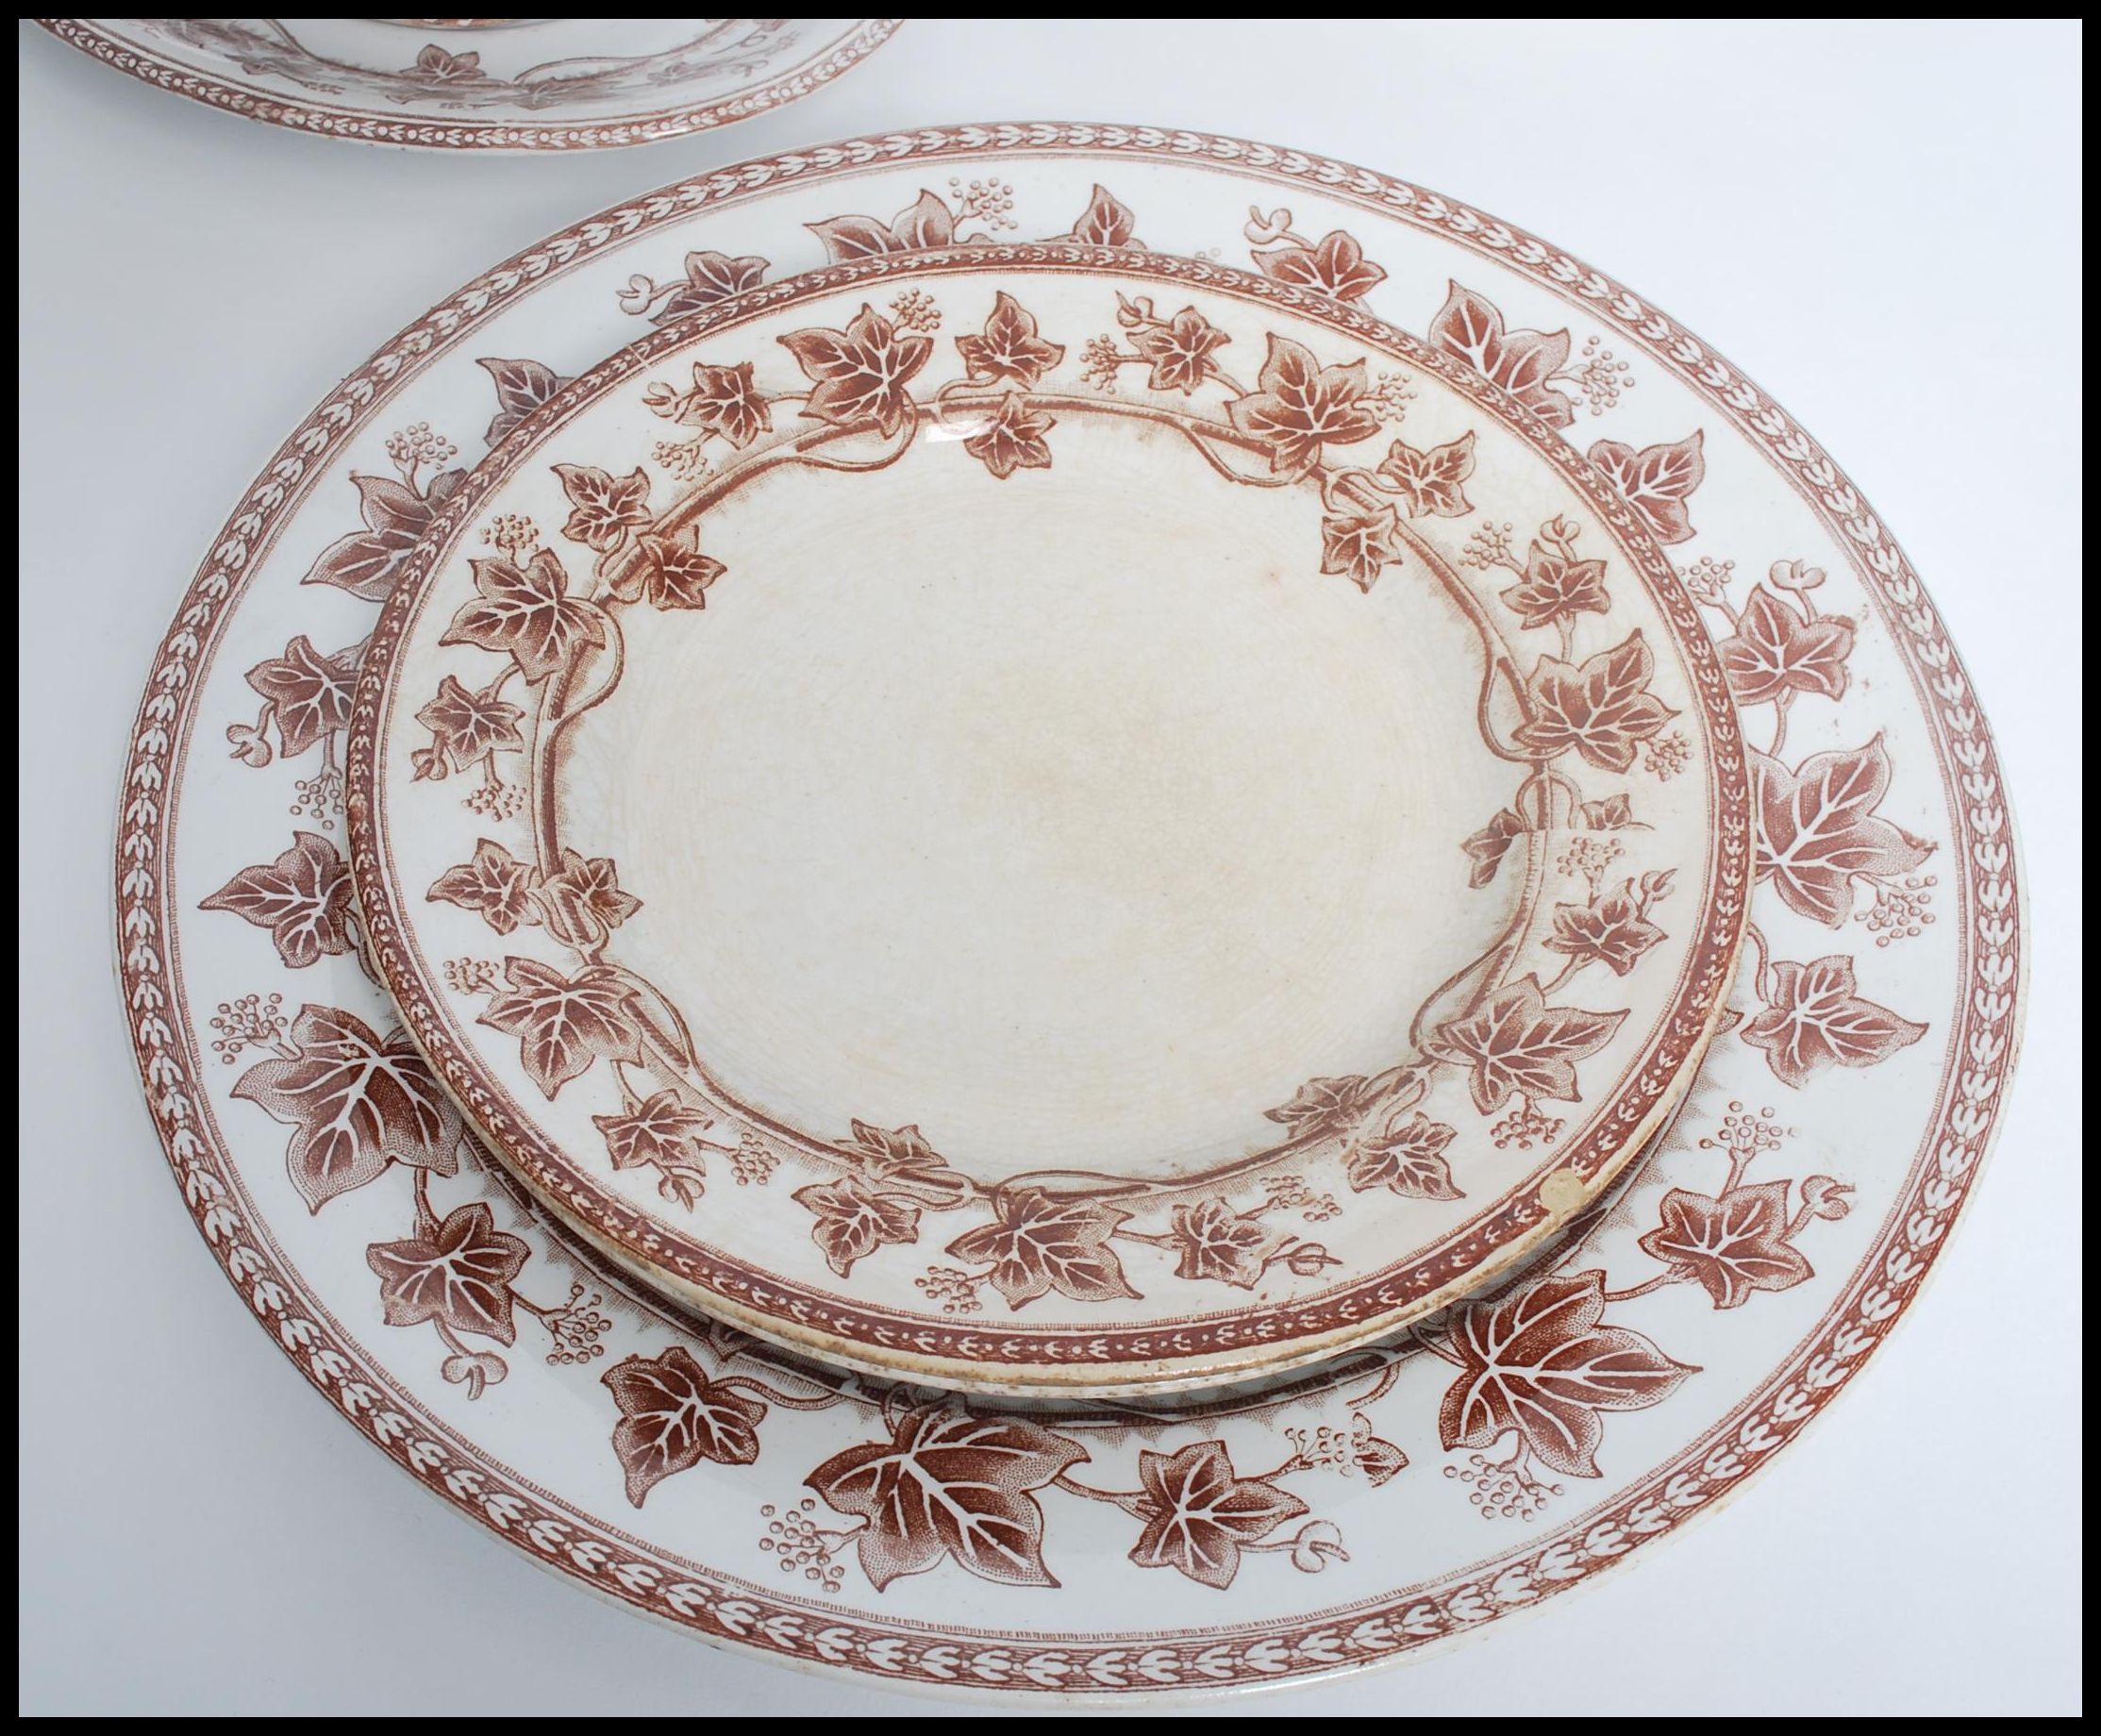 A 19th century Victorian Wedgwood Ivy pattern dinner service consisting of tureens, plates - Image 4 of 8